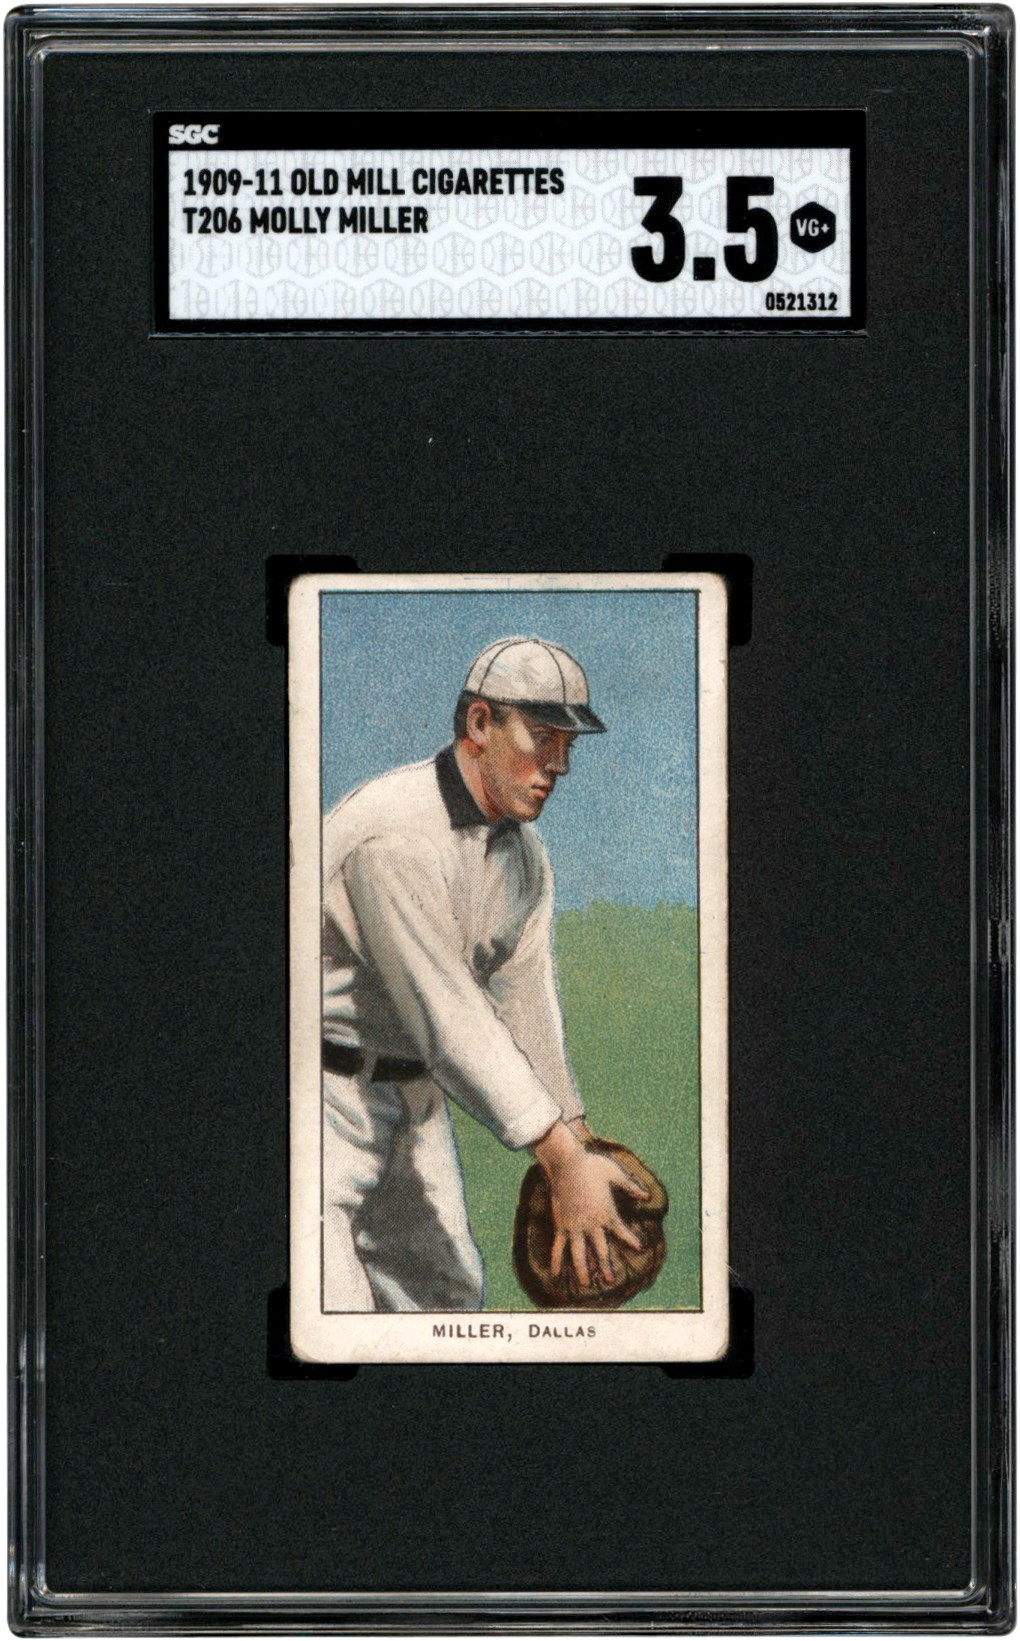 - 909-1911 T206 Molly Miller Old Mill Back Card SGC VG+ 3.5 Southern Leaguer